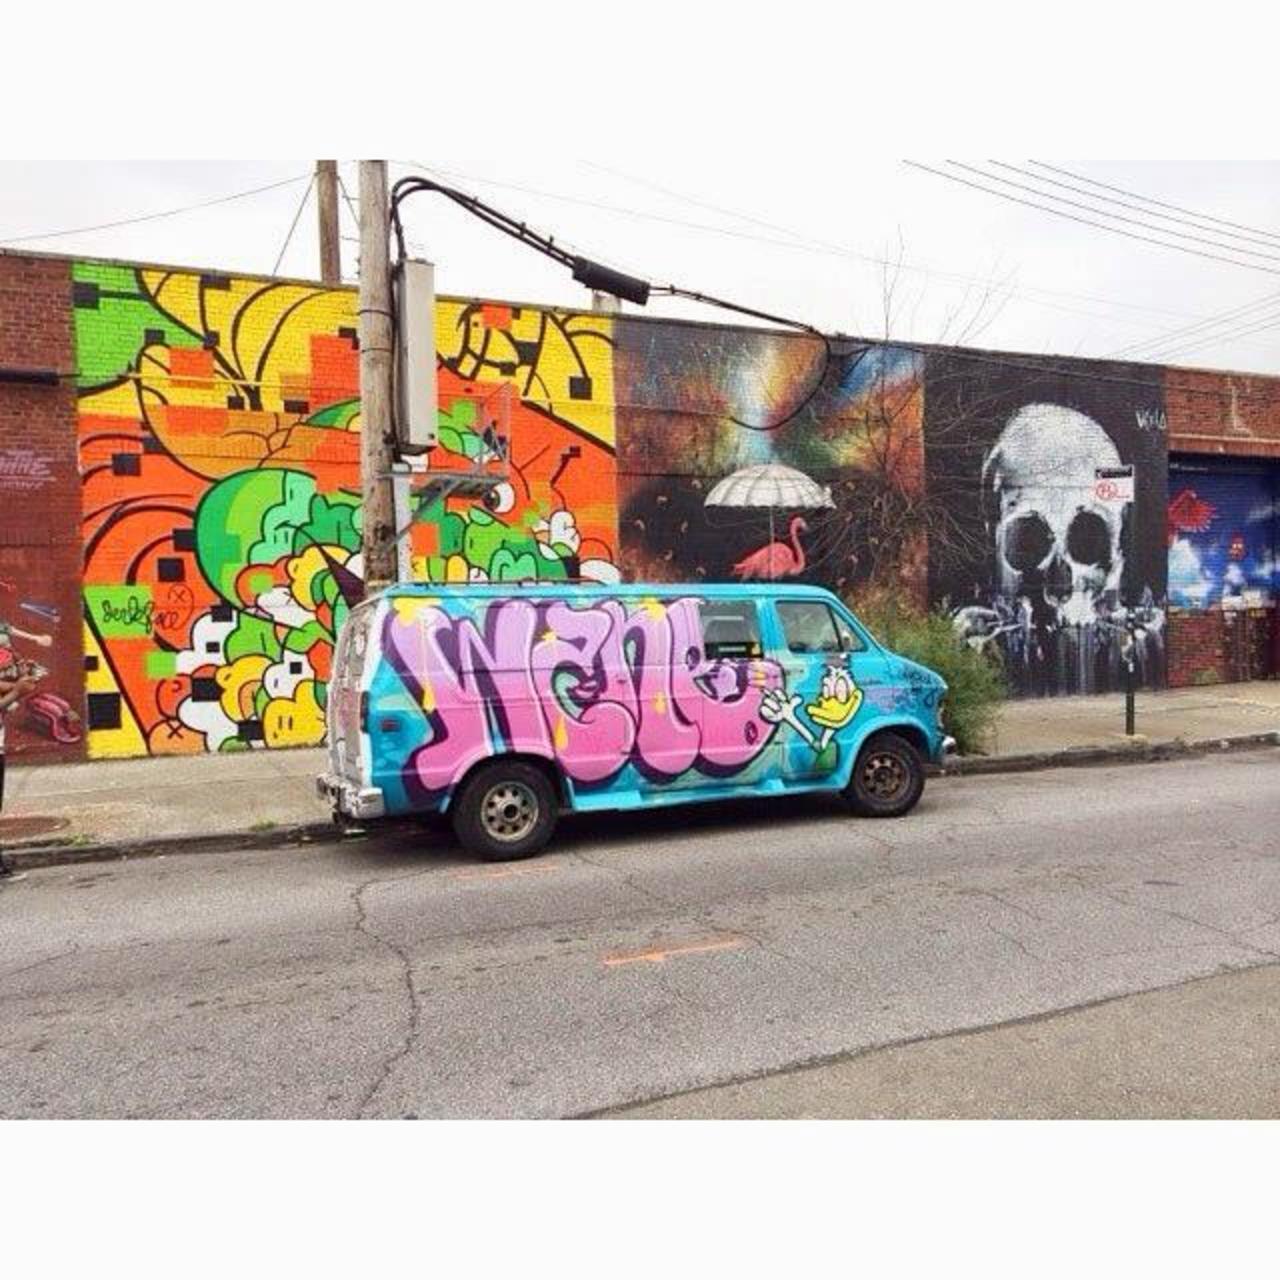 I saw this van in #brooklyn . Does anyone know of the #artist ? #streetart #graffiti http://t.co/DNxaFEJjc8